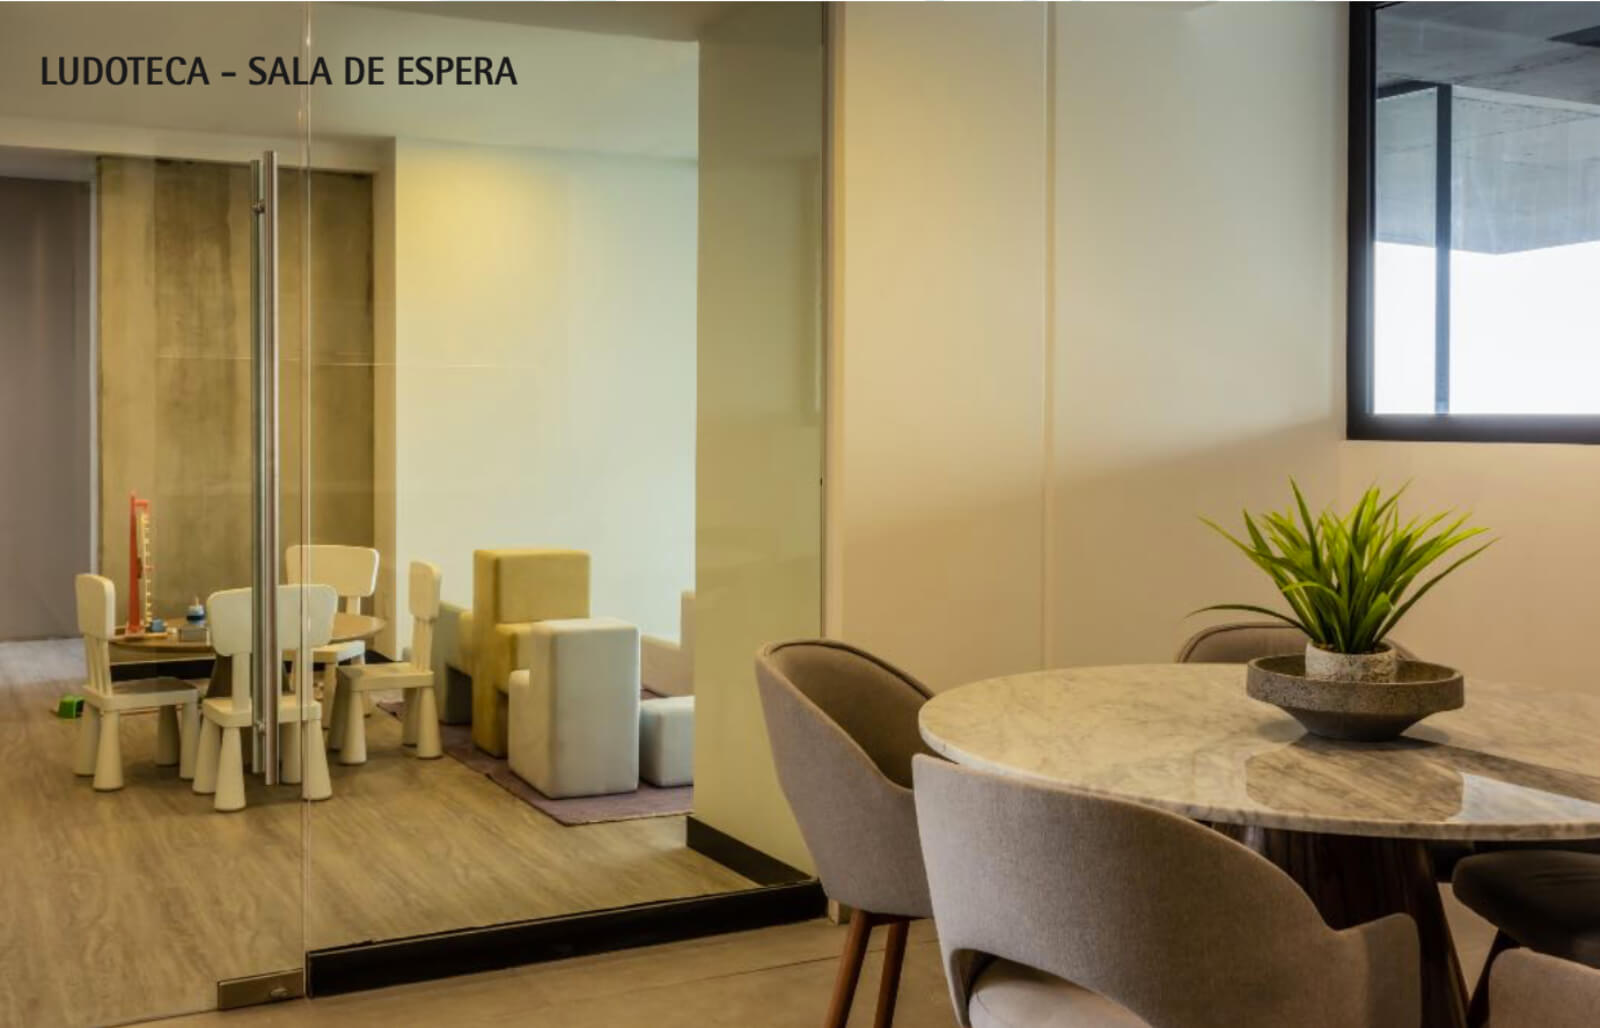 Apartment in Polanco, pool, jacuzzi, movie theater, pet-friendly for pre-sale.